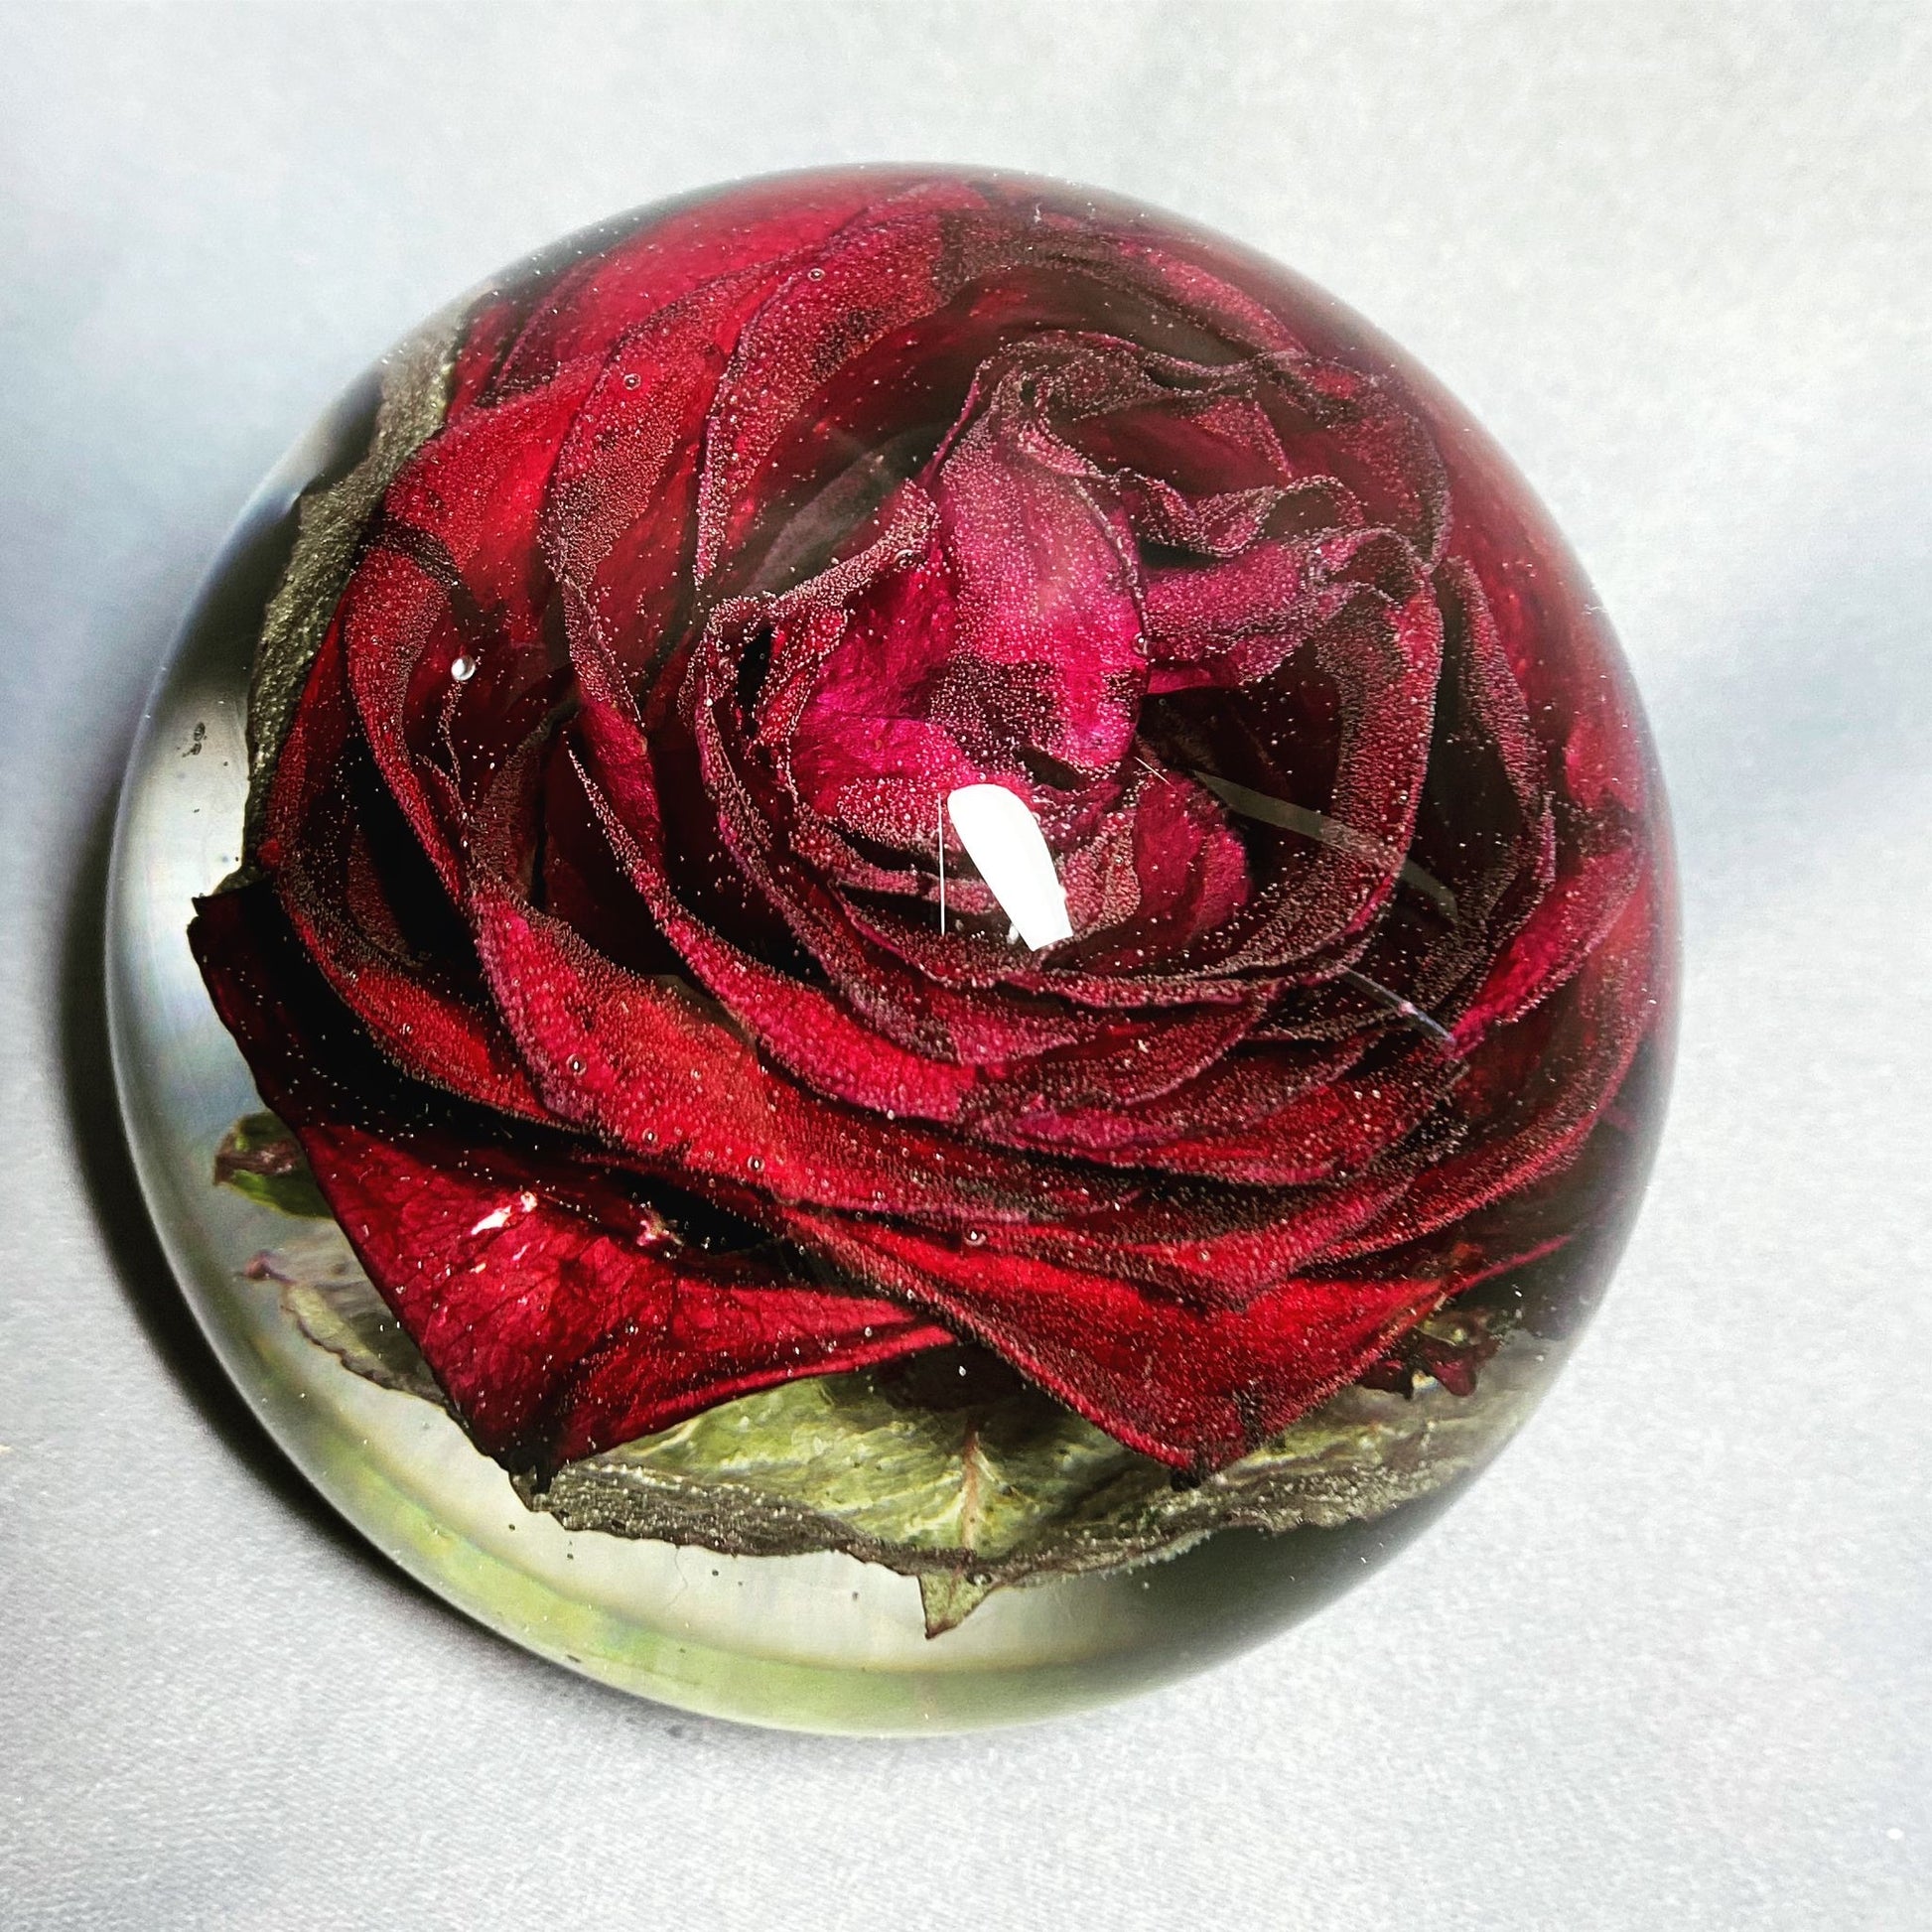 A decorative sphere paperweight made of resin, showcasing beautifully preserved wedding flowers, adding a unique and memorable touch to any space.